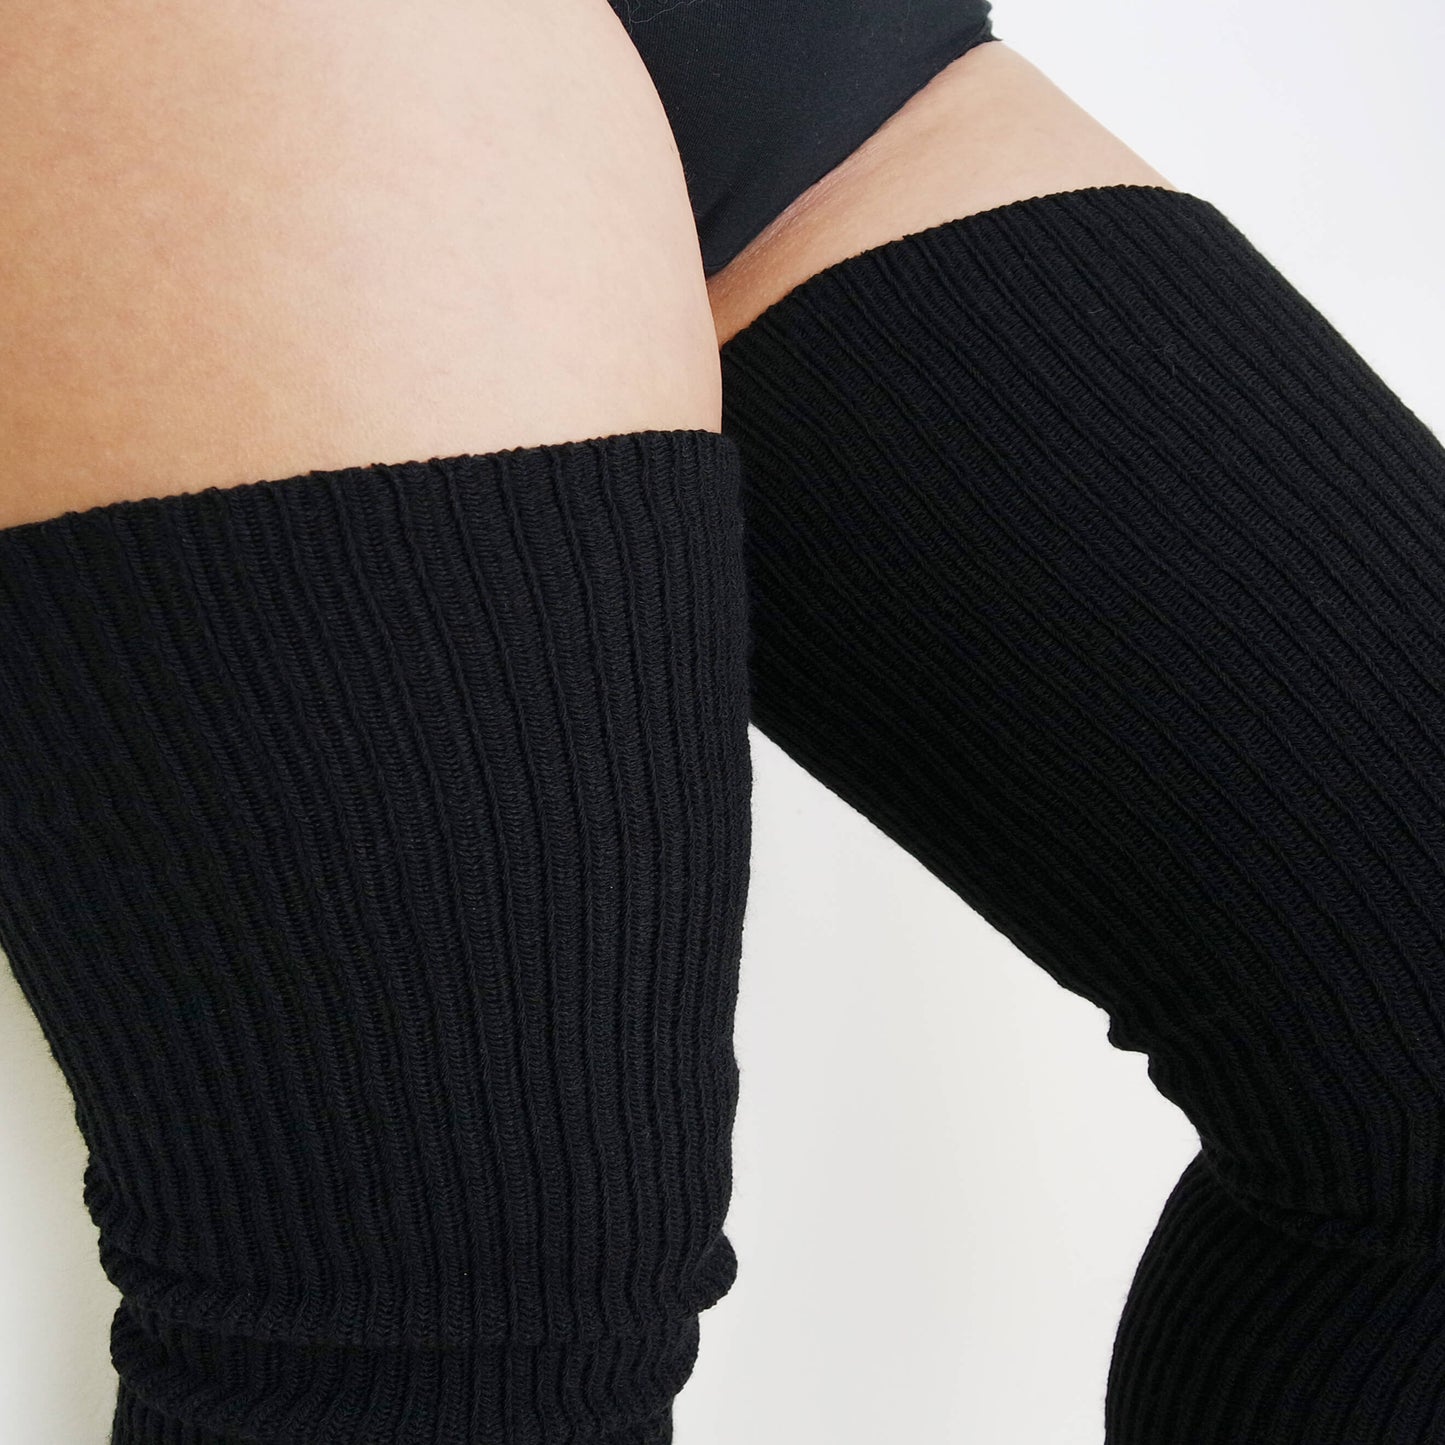 plus size woman wears ribbed style thigh high socks